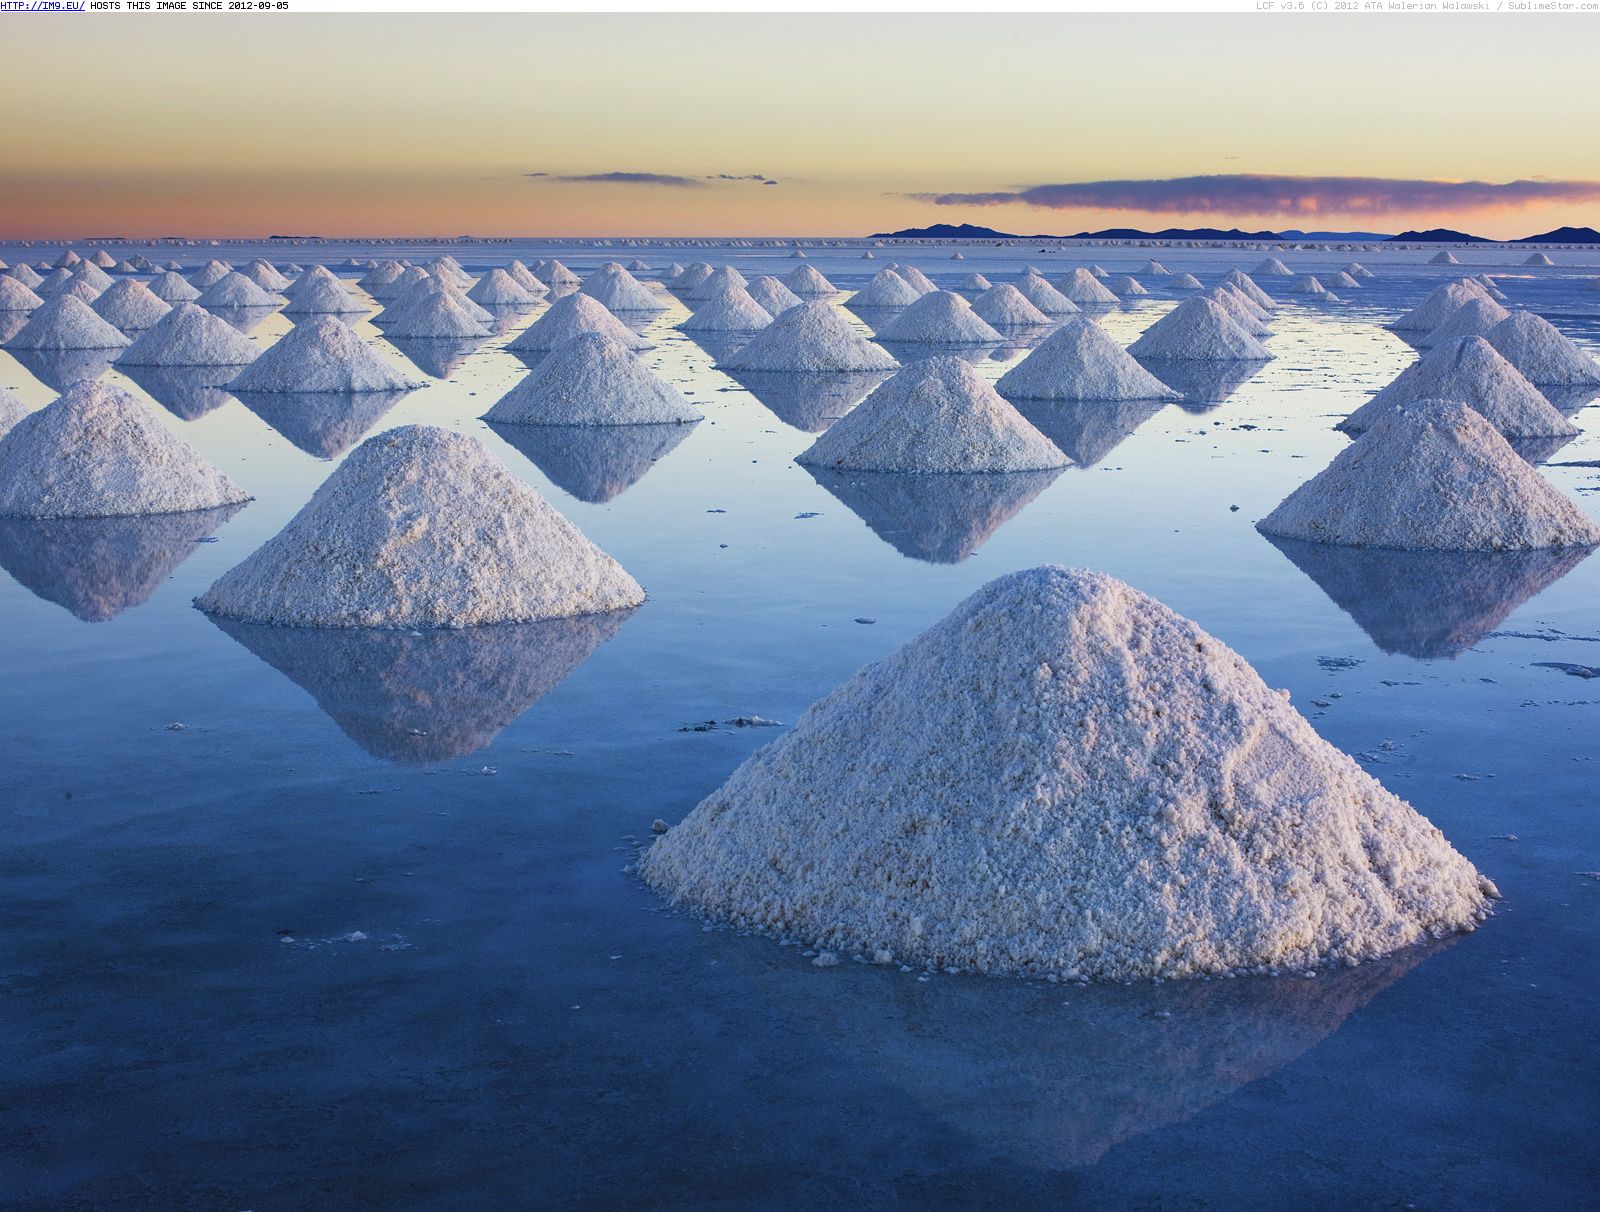 In mid-December 2018, the German medium-sized enterprise ACI Systems, located in Zimmern ob Rottweil (Baden-Württemberg) was able to obtain access to the enormous lithium deposits in the Salar de Uyuni, the world's largest salt lake